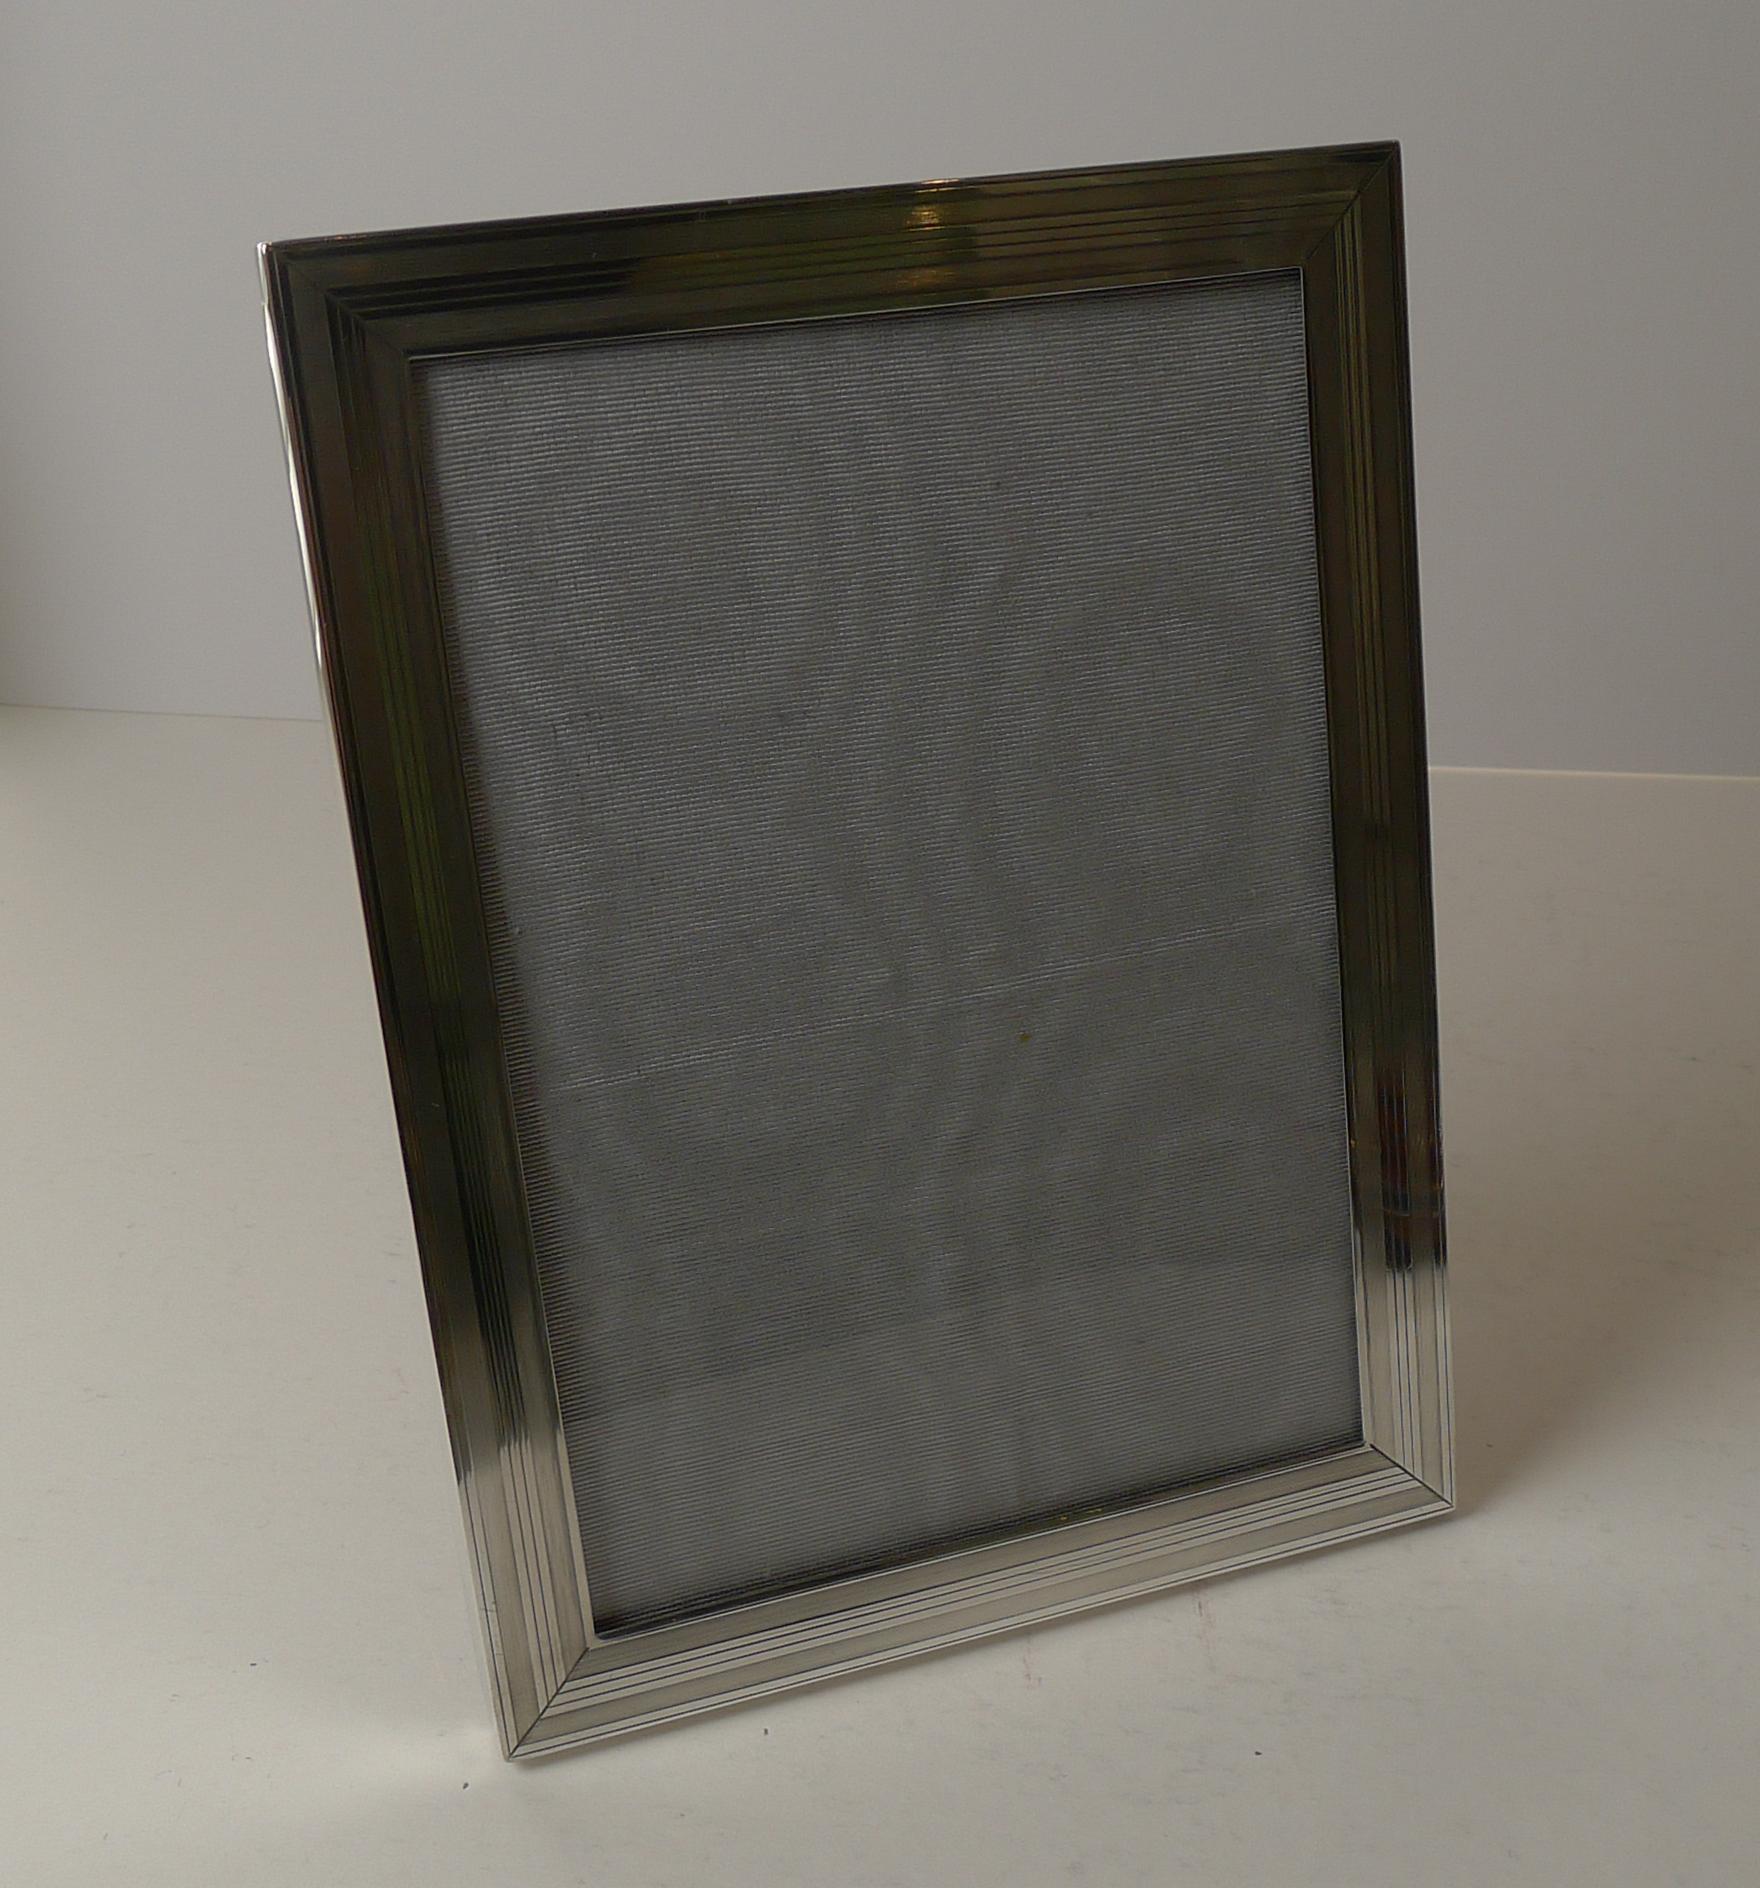 A terrific and very smart photograph frame made from English sterling silver beautifully decorated with a linear engine turned decoration.

The back is made from solid English Oak with a folding easel stand.

The silver is fully hallmarked for